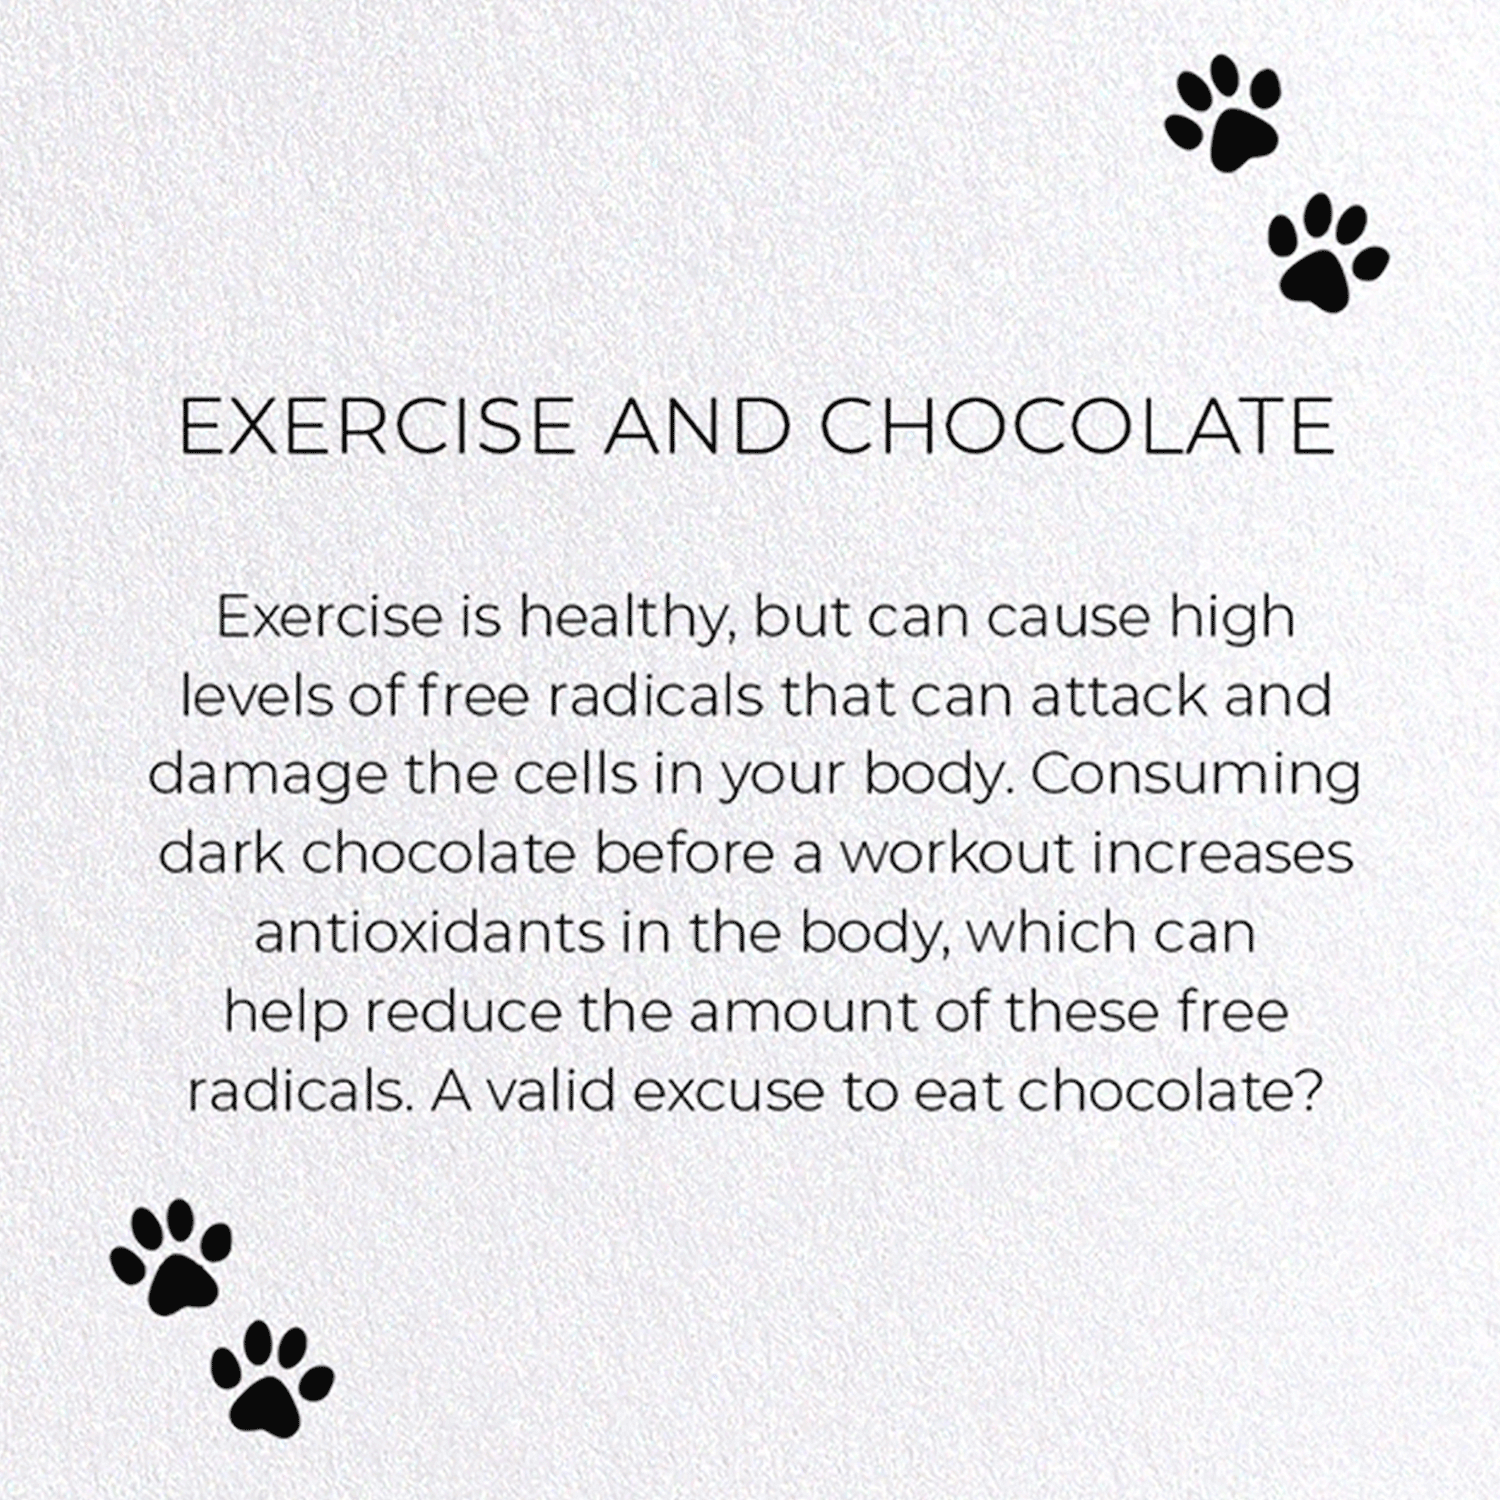 EXERCISE AND CHOCOLATE